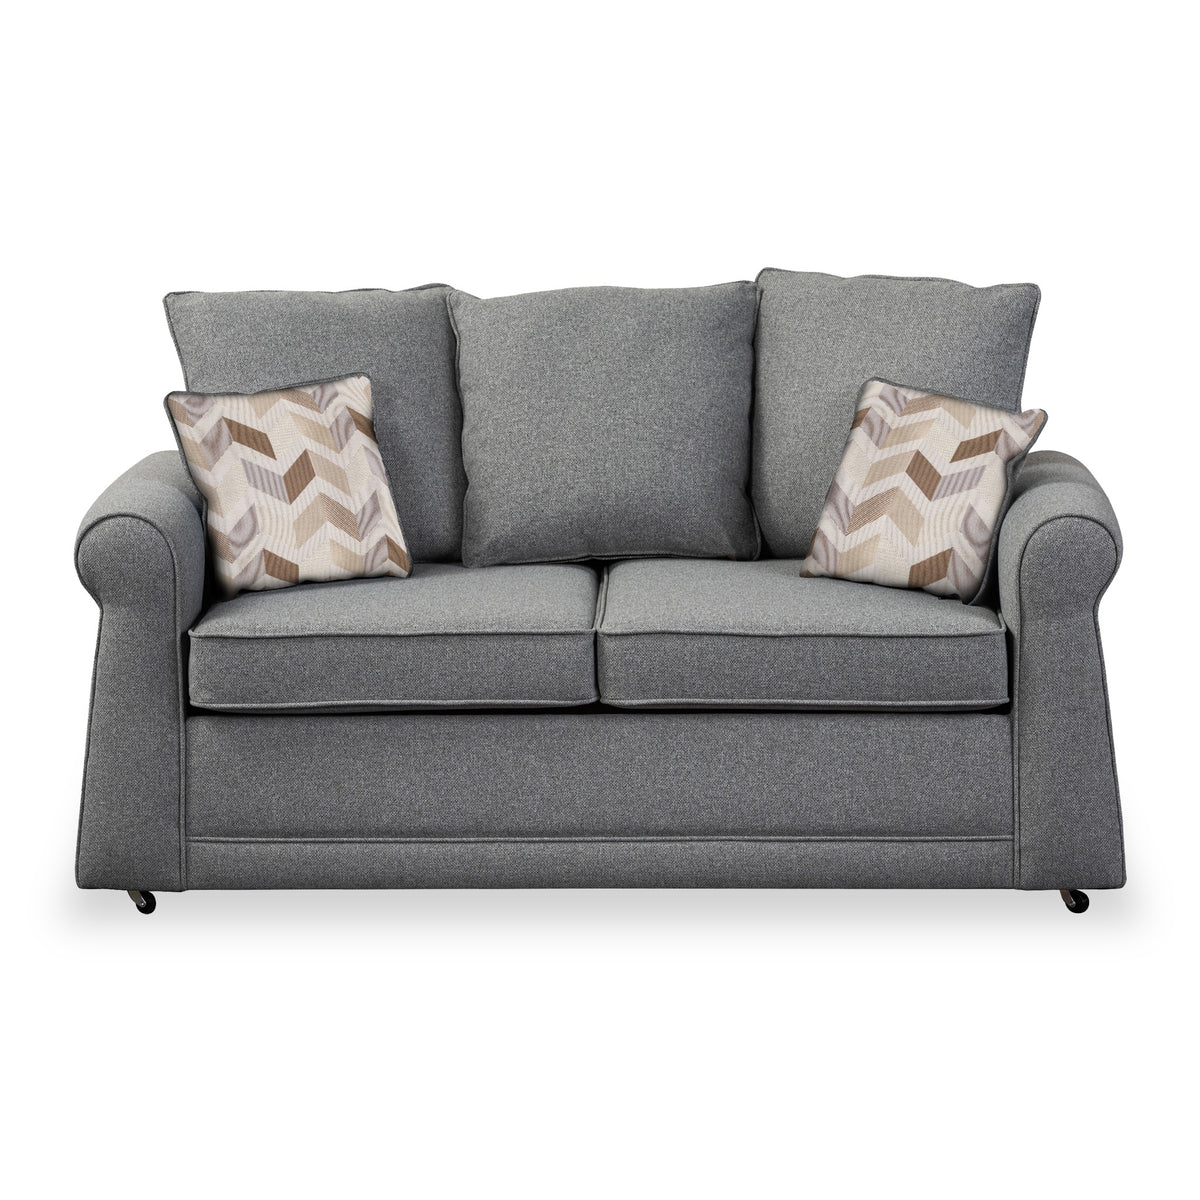 Broughton Silver Faux Linen 2 Seater Sofabed with Oatmeal Scatter Cushions from Roseland Furniture